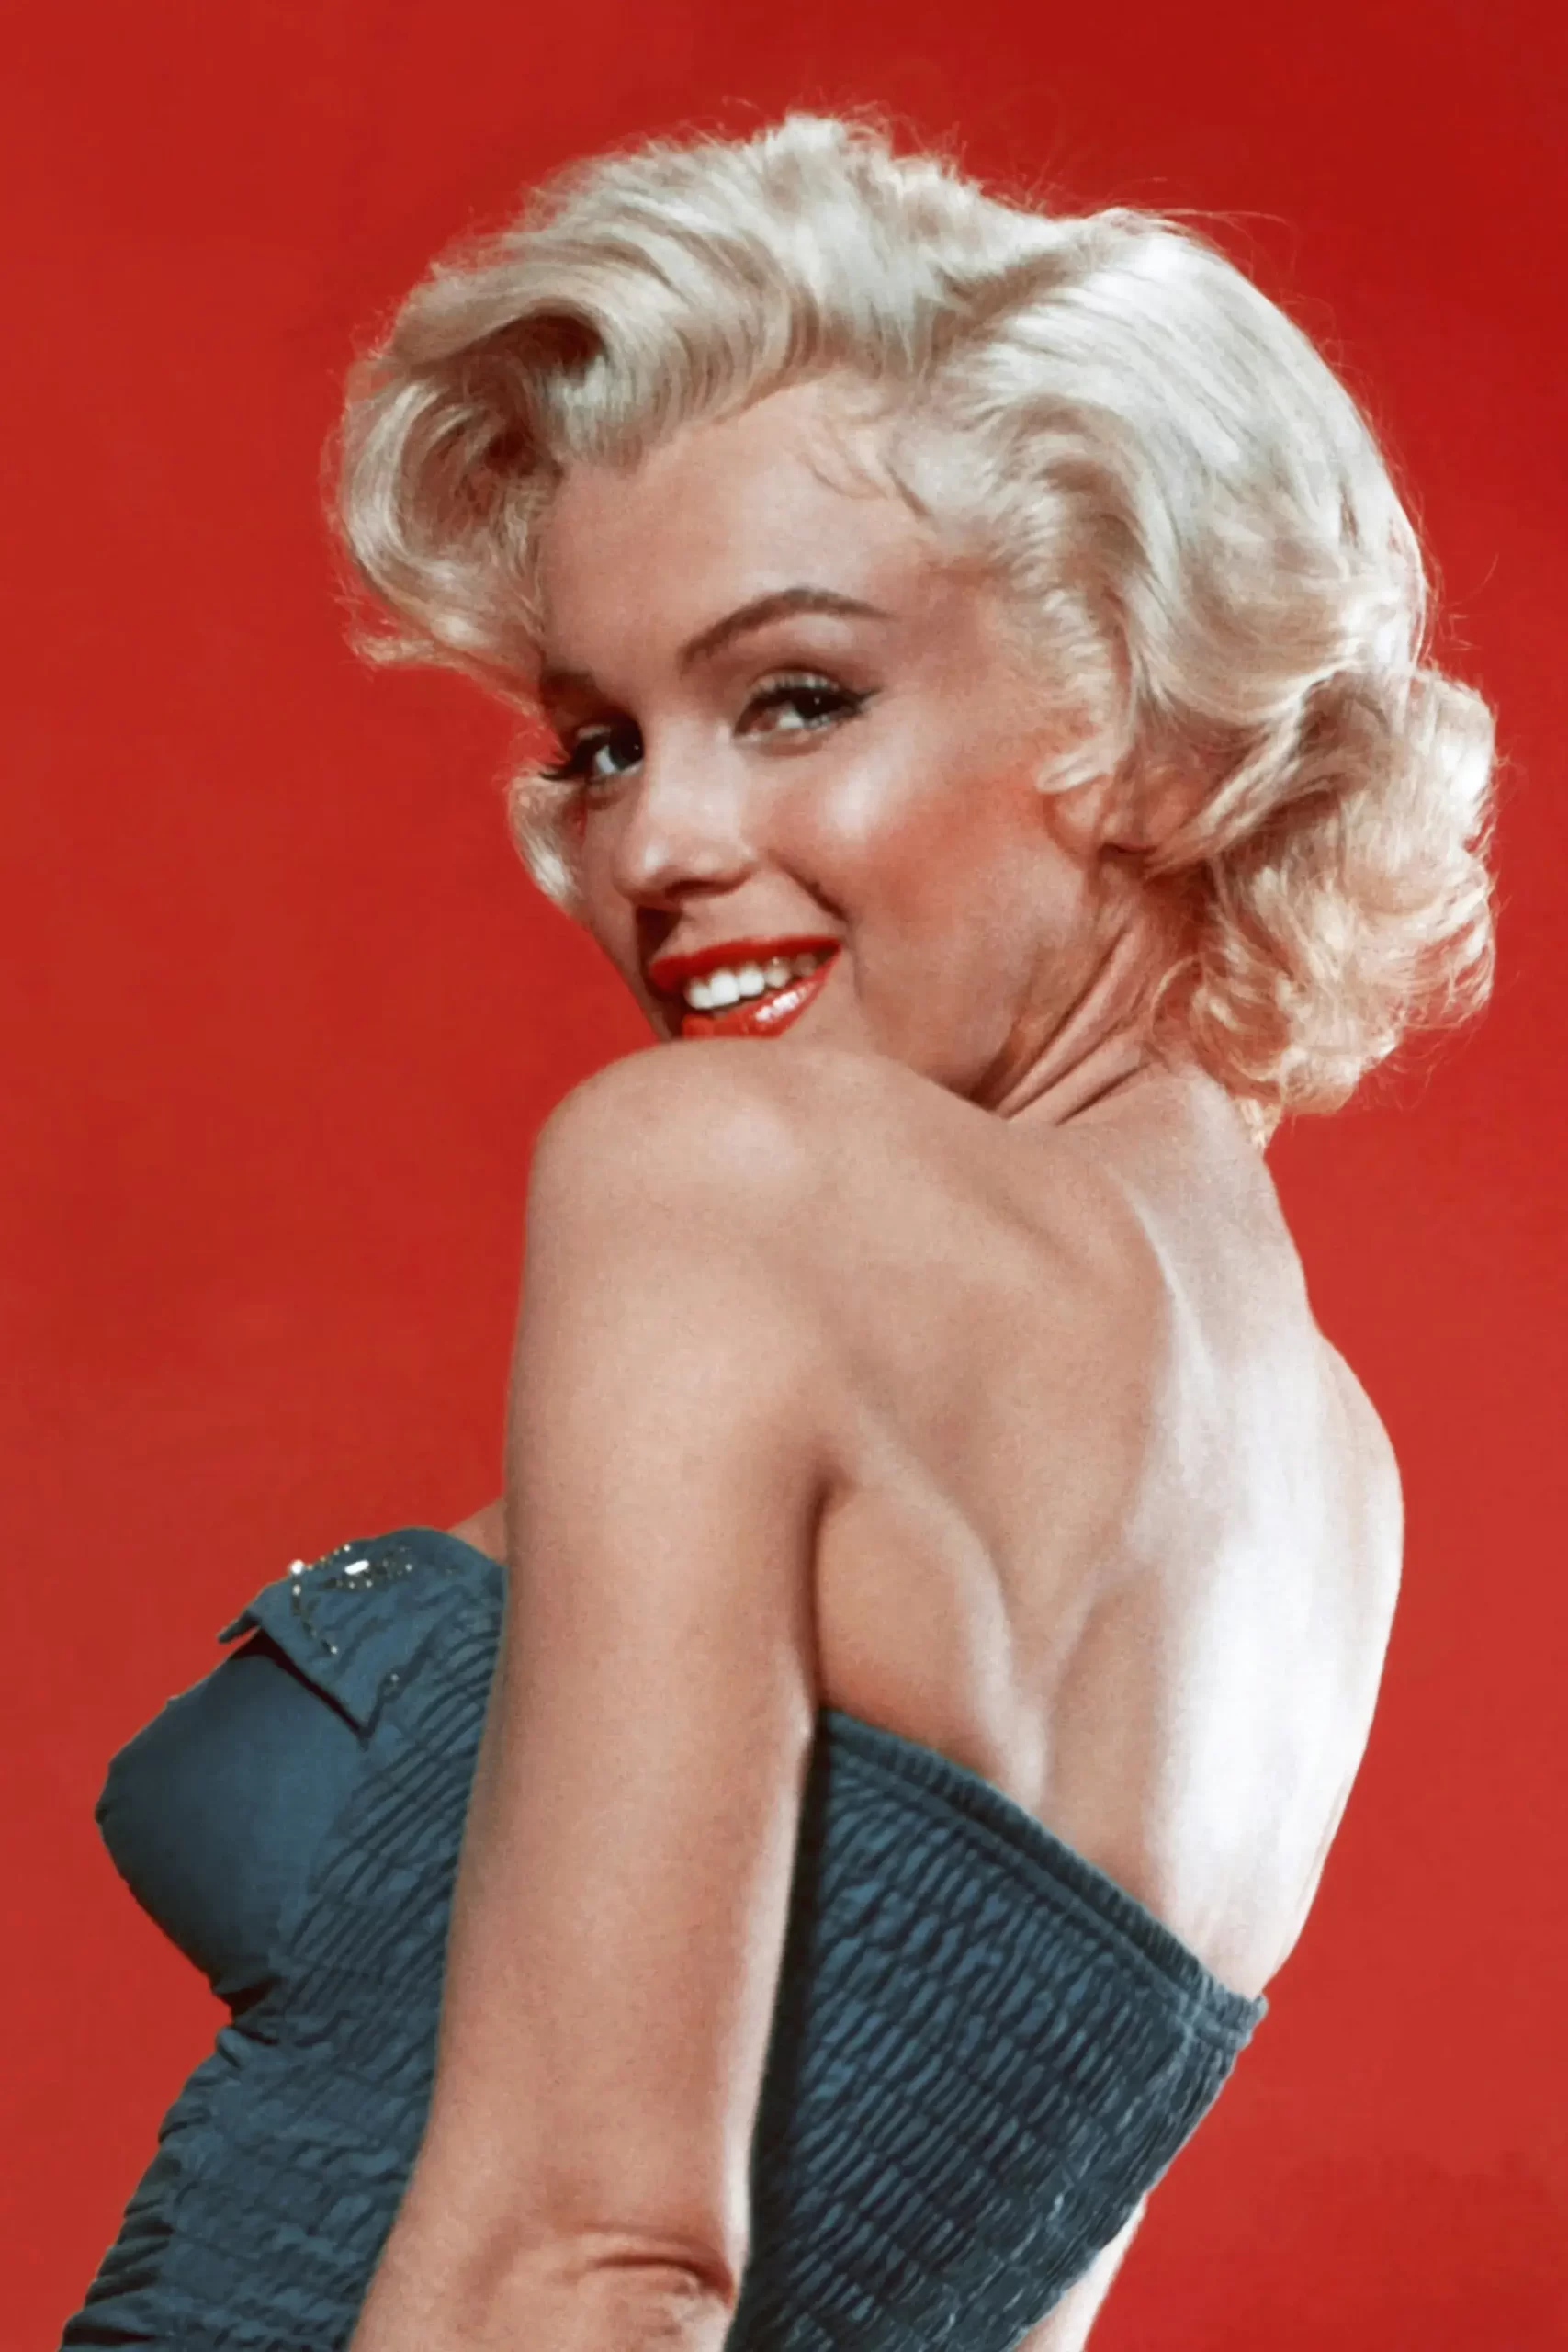 The 10 Most Beautiful and Famous Women Ever